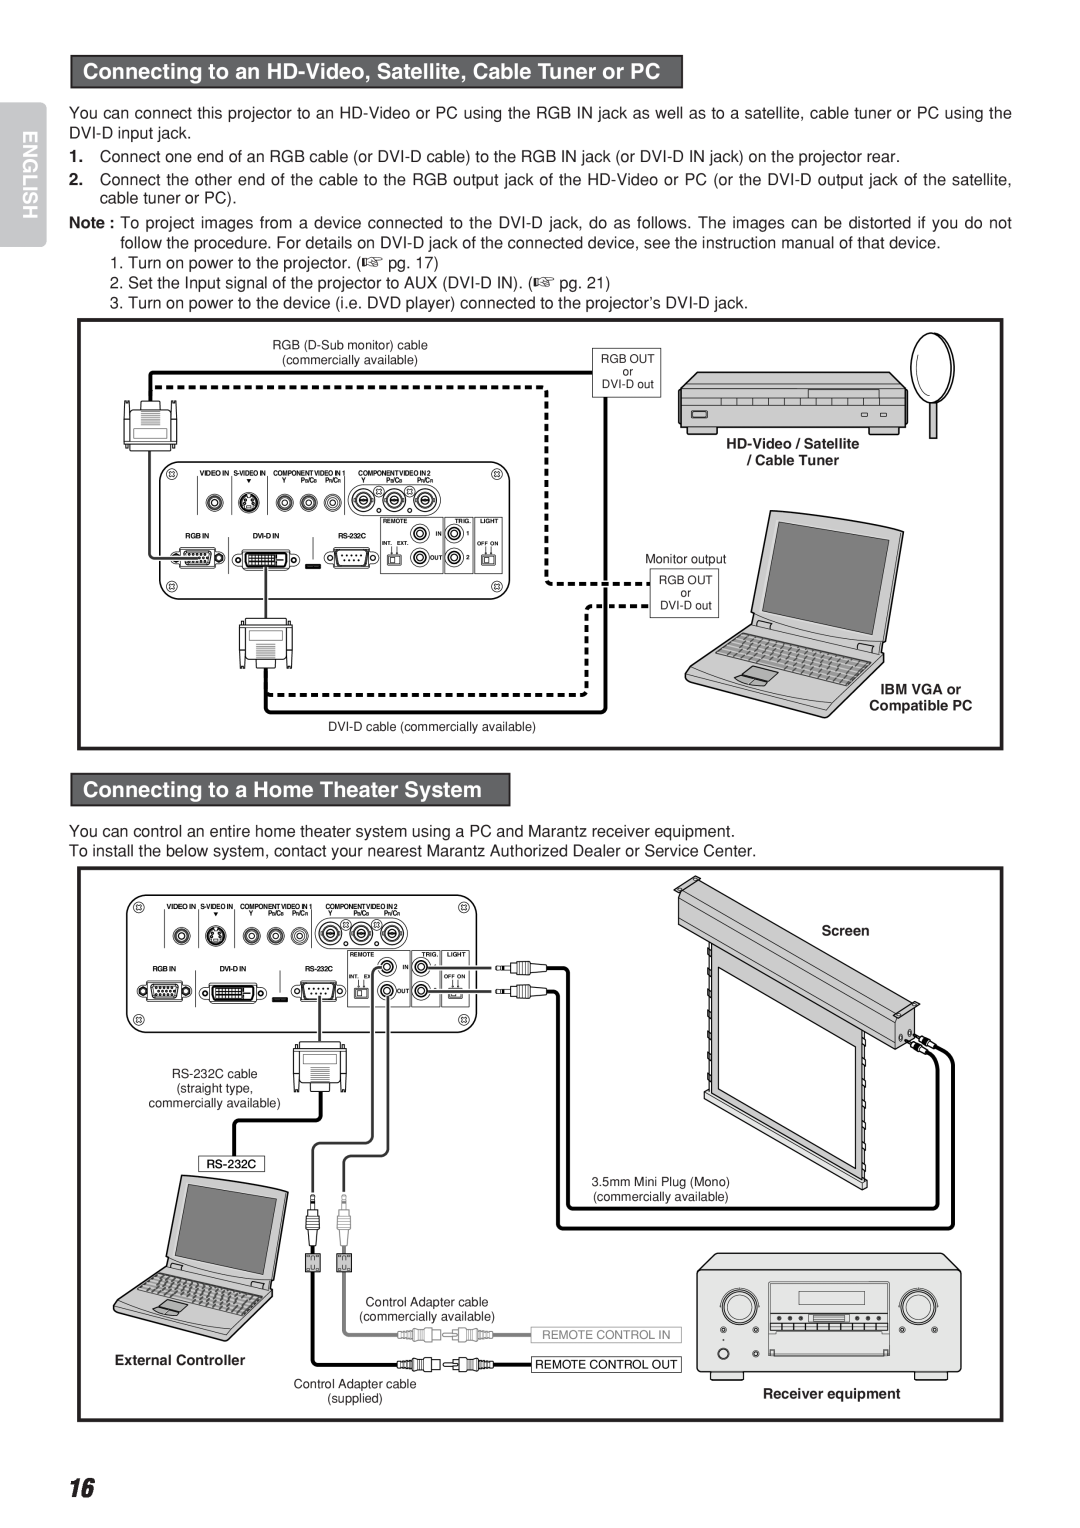 Marantz Model VP-10S1 manual Connecting to an HD-Video, Satellite, Cable Tuner or PC, Connecting to a Home Theater System 